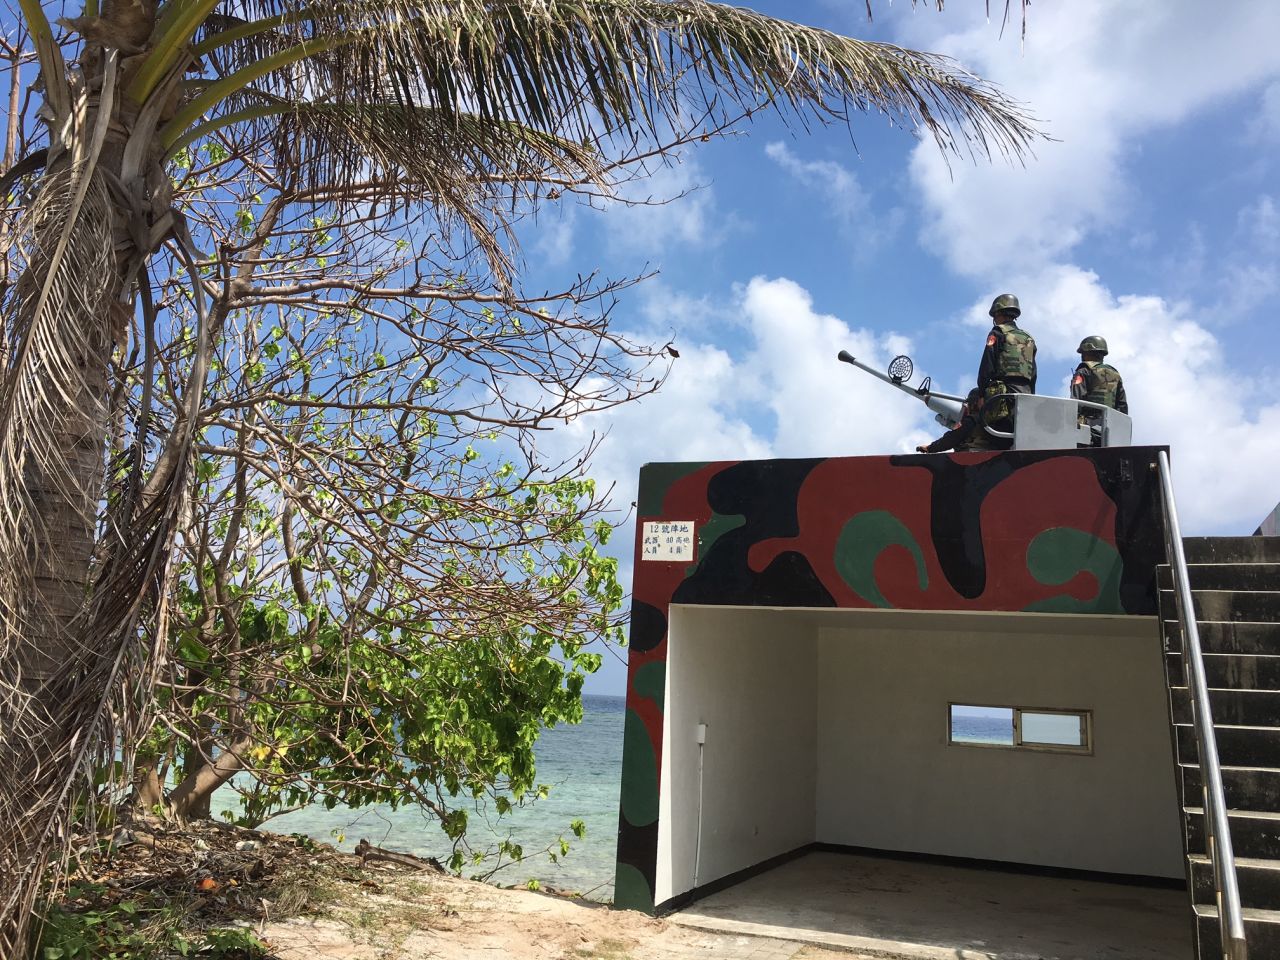 One of the military bunkers and anti-aircraft batteries defending Taiping Island.  The tiny island is only .51 square kilometers in size.  Officials say they replaced the Marines who used to defend this island with coast guard personnel more than a decade ago. 